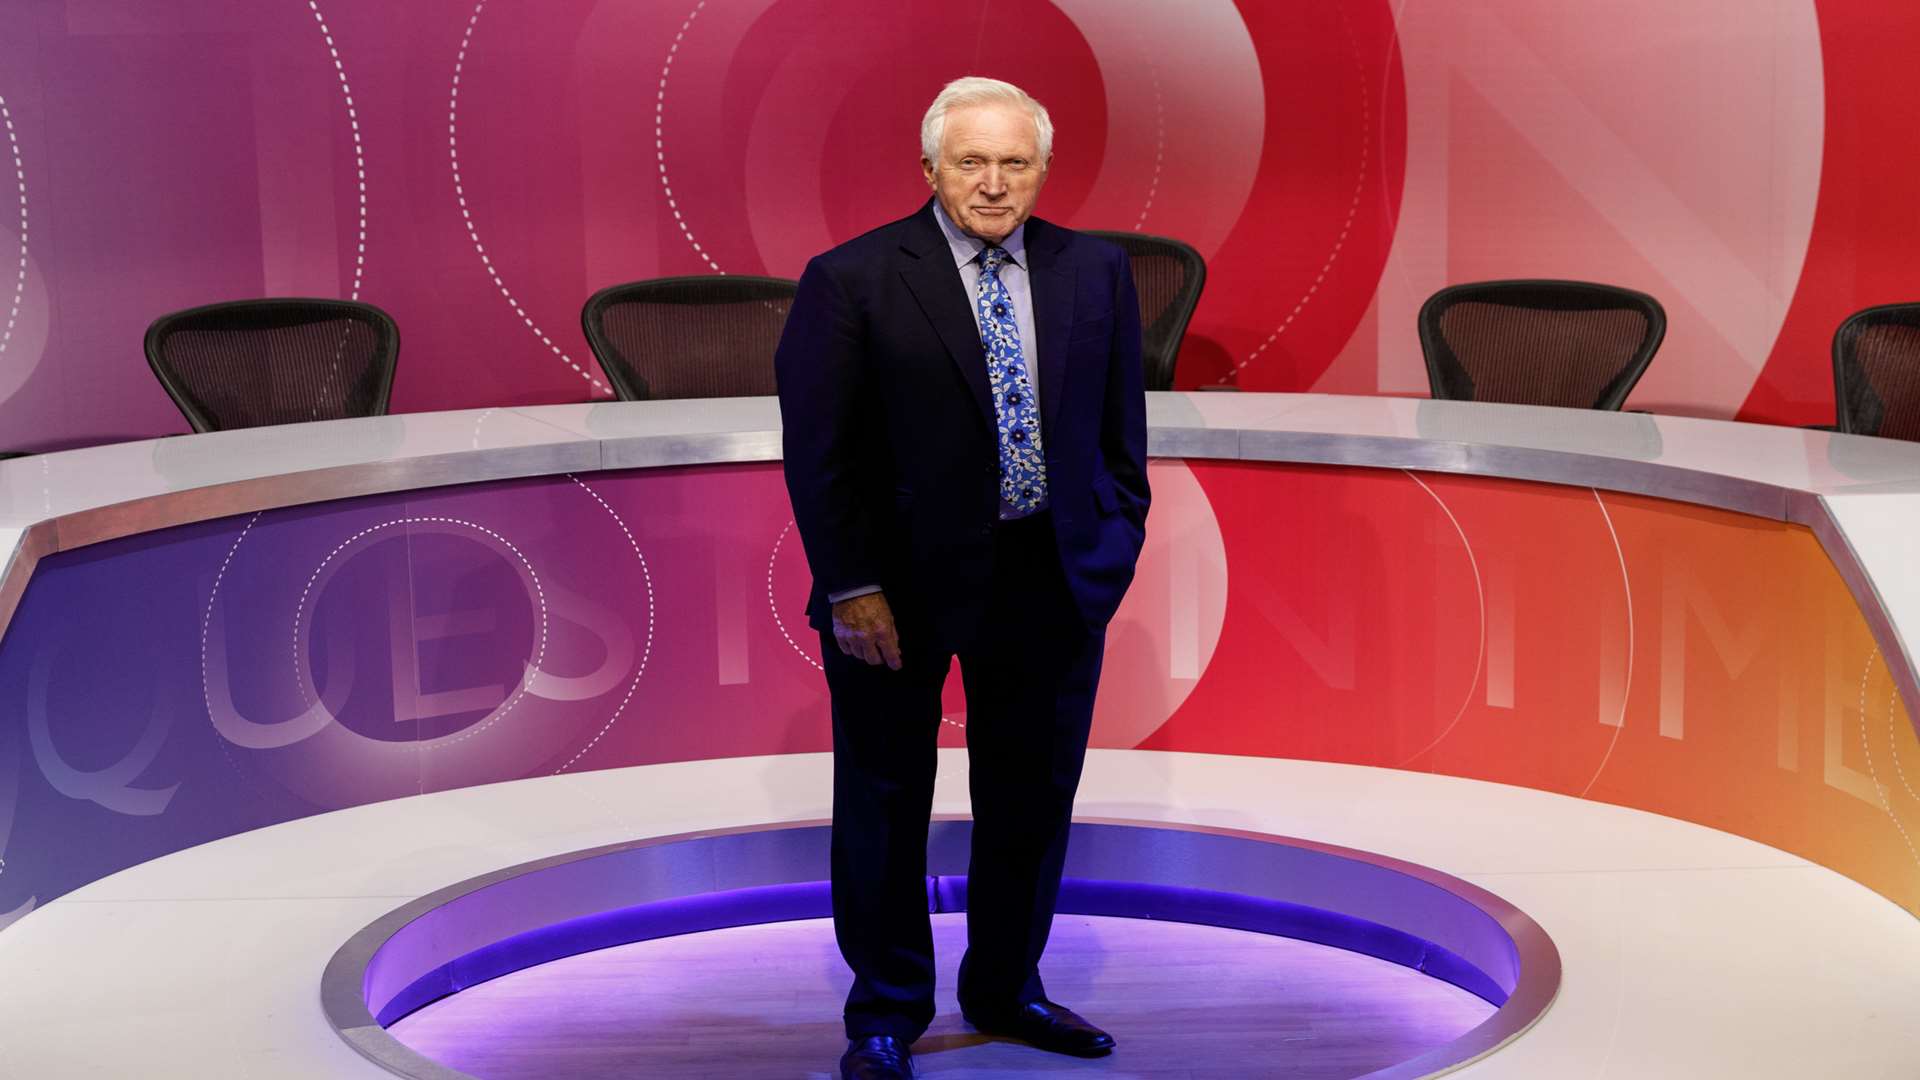 David Dimbleby. Picture courtesy of Tinopolis